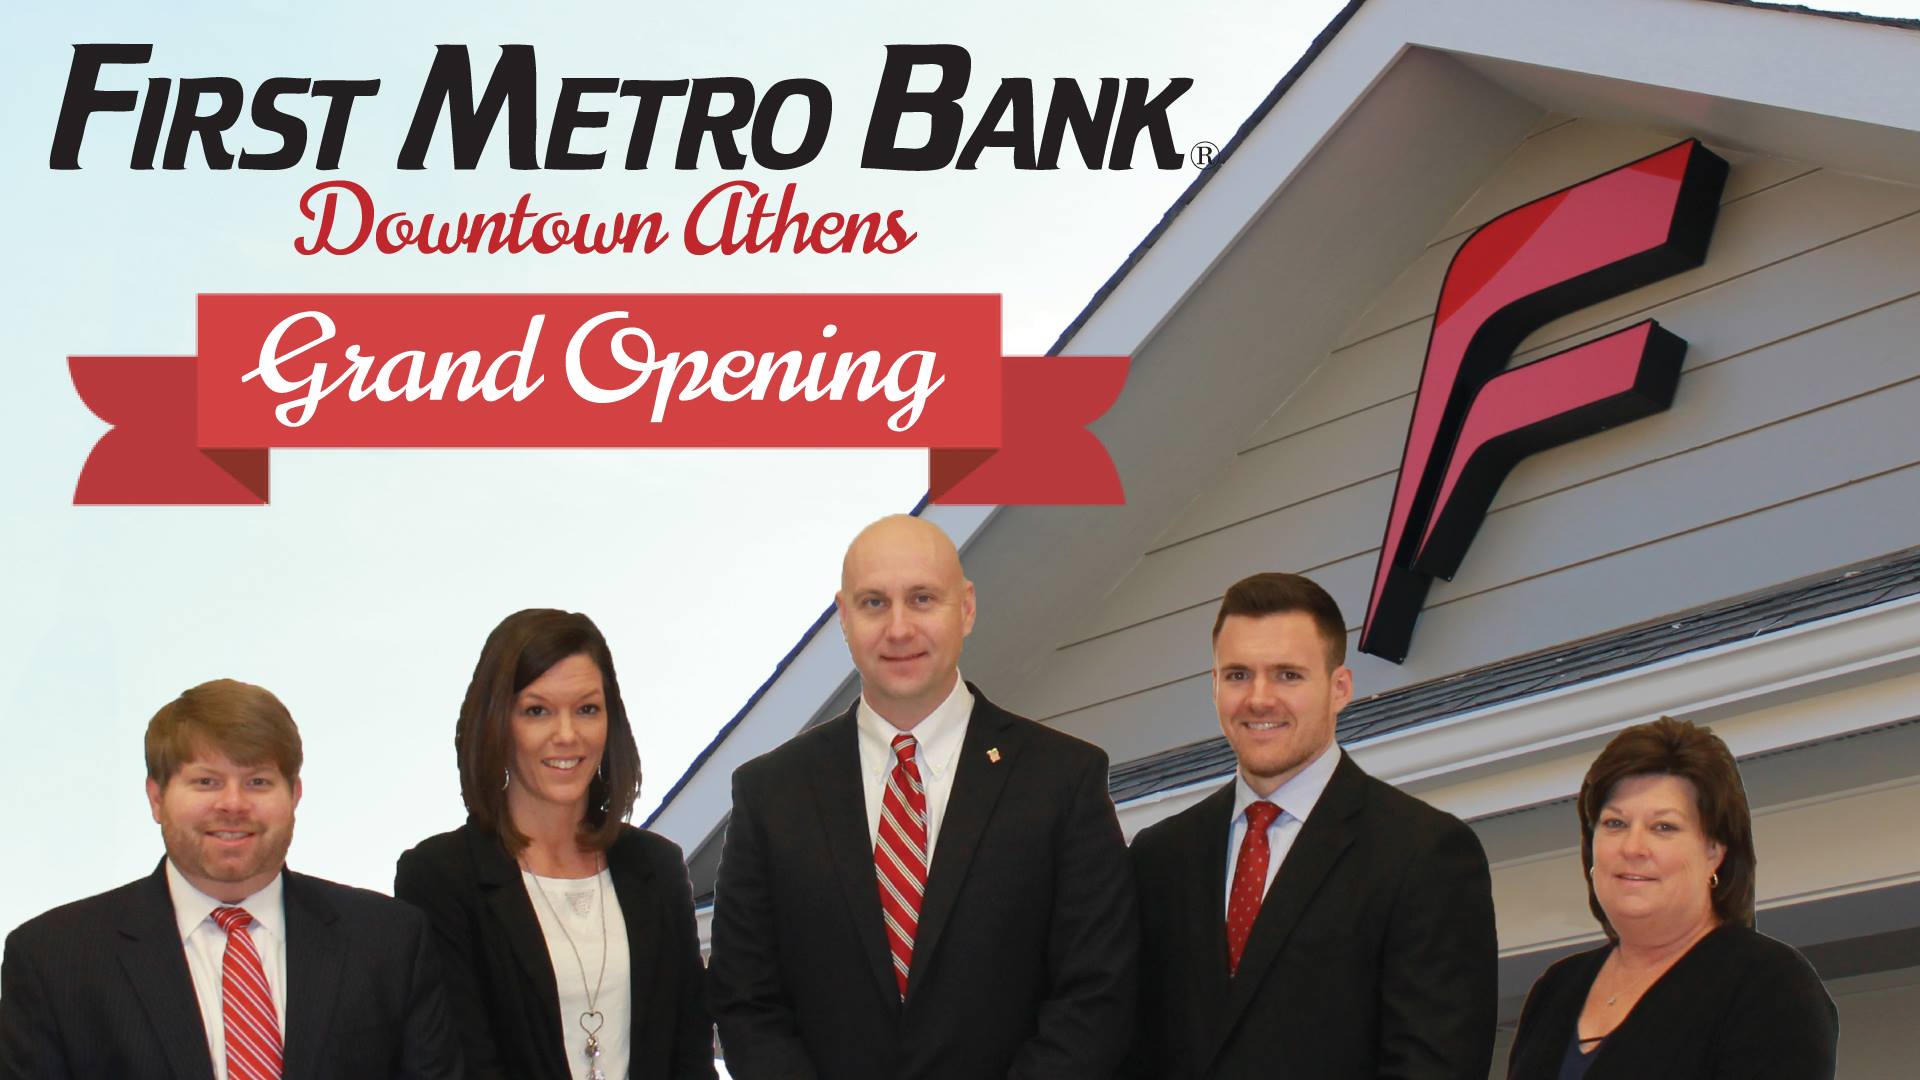 First Metro Bank – Grand Opening in Downtown Athens